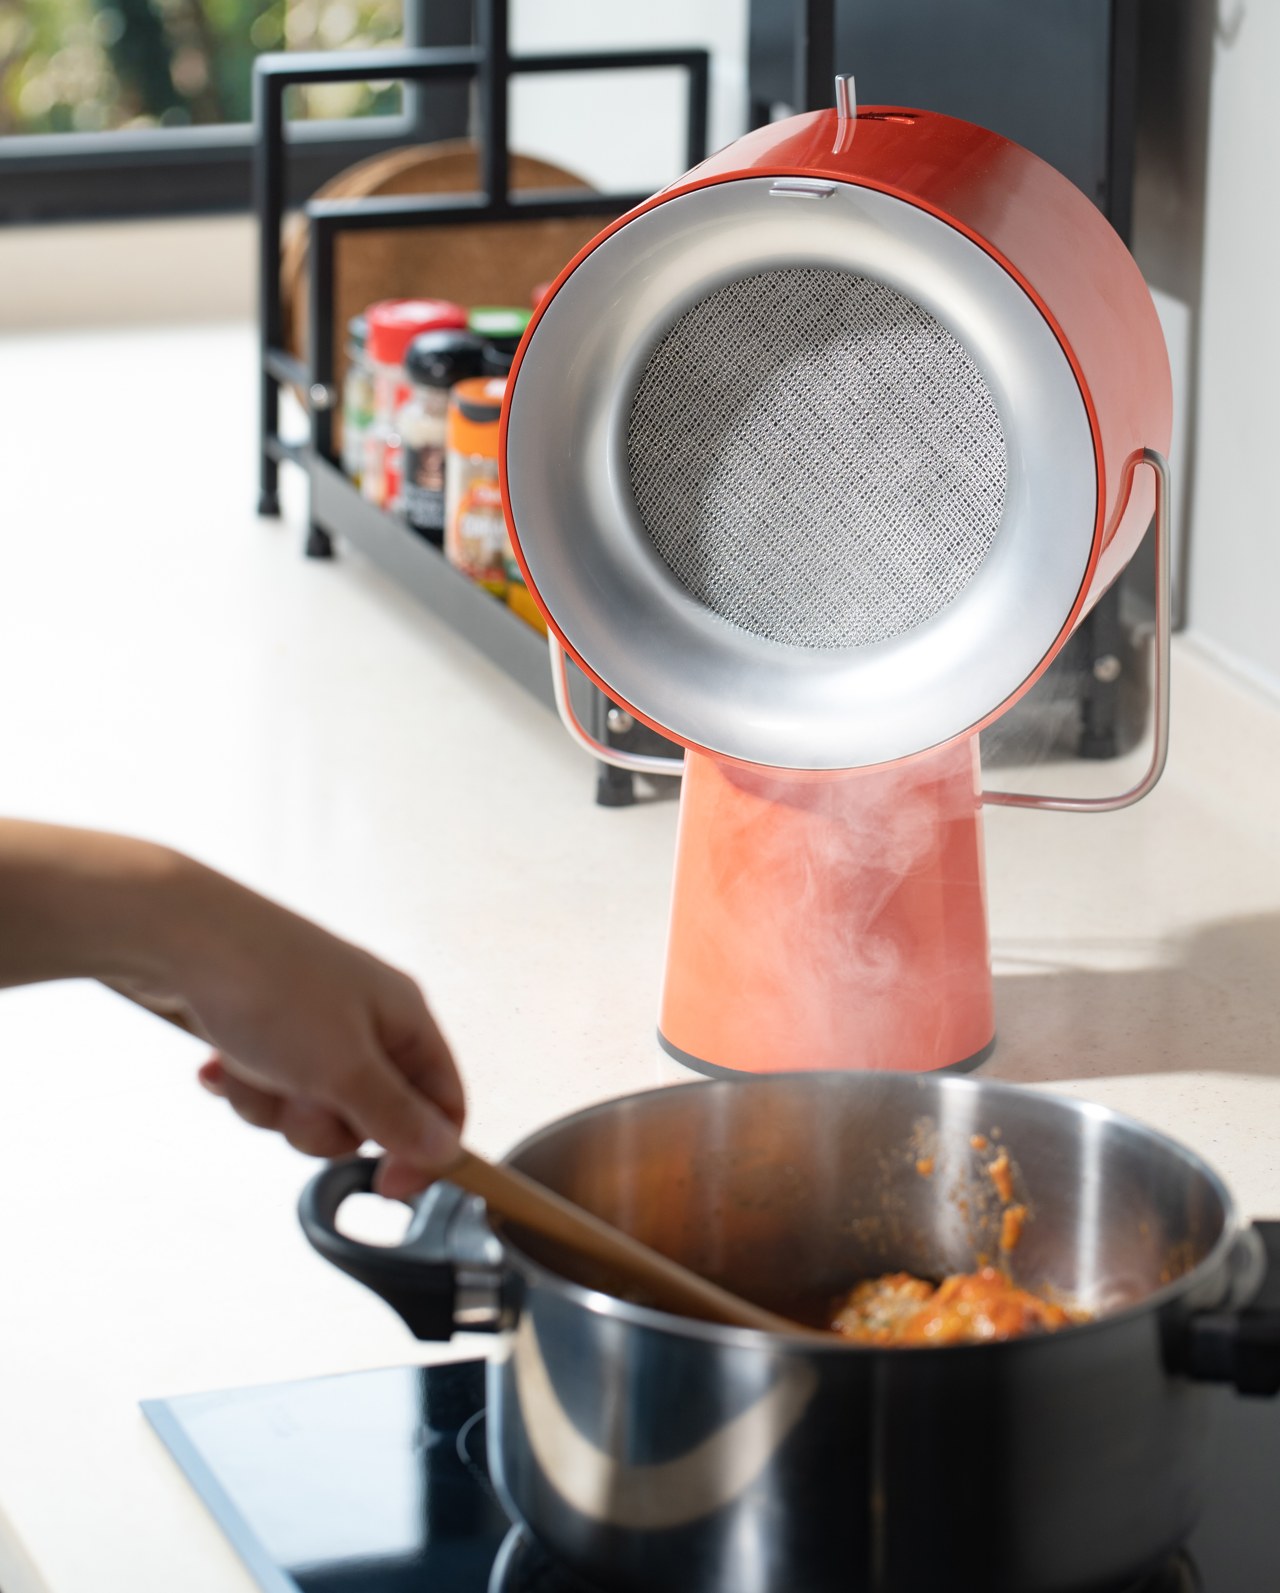 AirHood Wireless portable range hood reduces cooking odors and oil residue  from forming » Gadget Flow